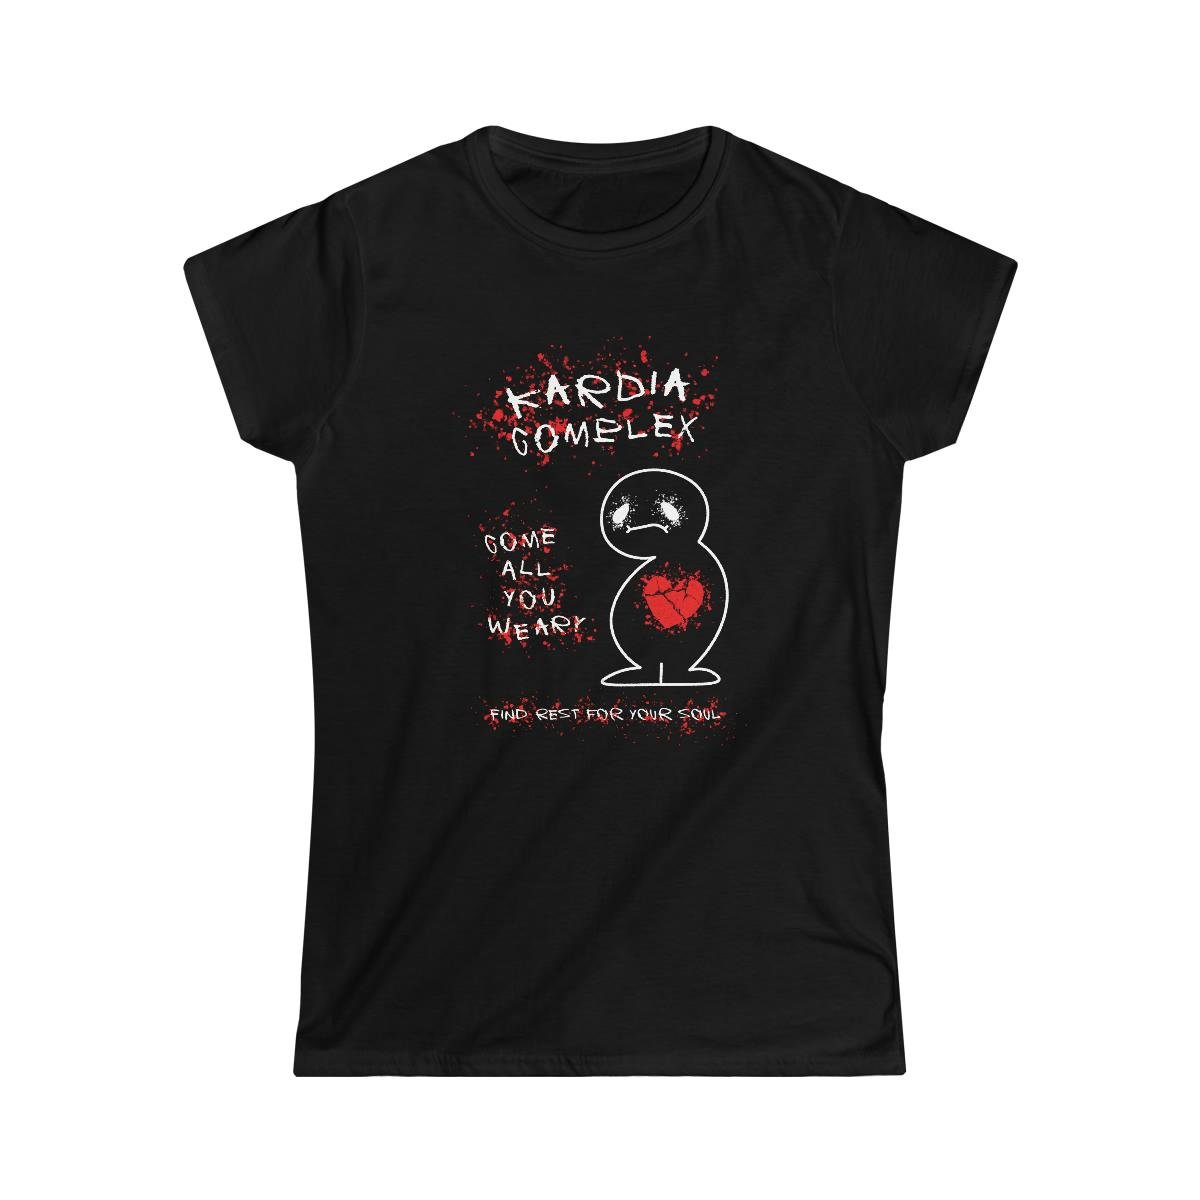 Kardia Complex – Come All You Weary Women’s Short Sleeve Tshirt